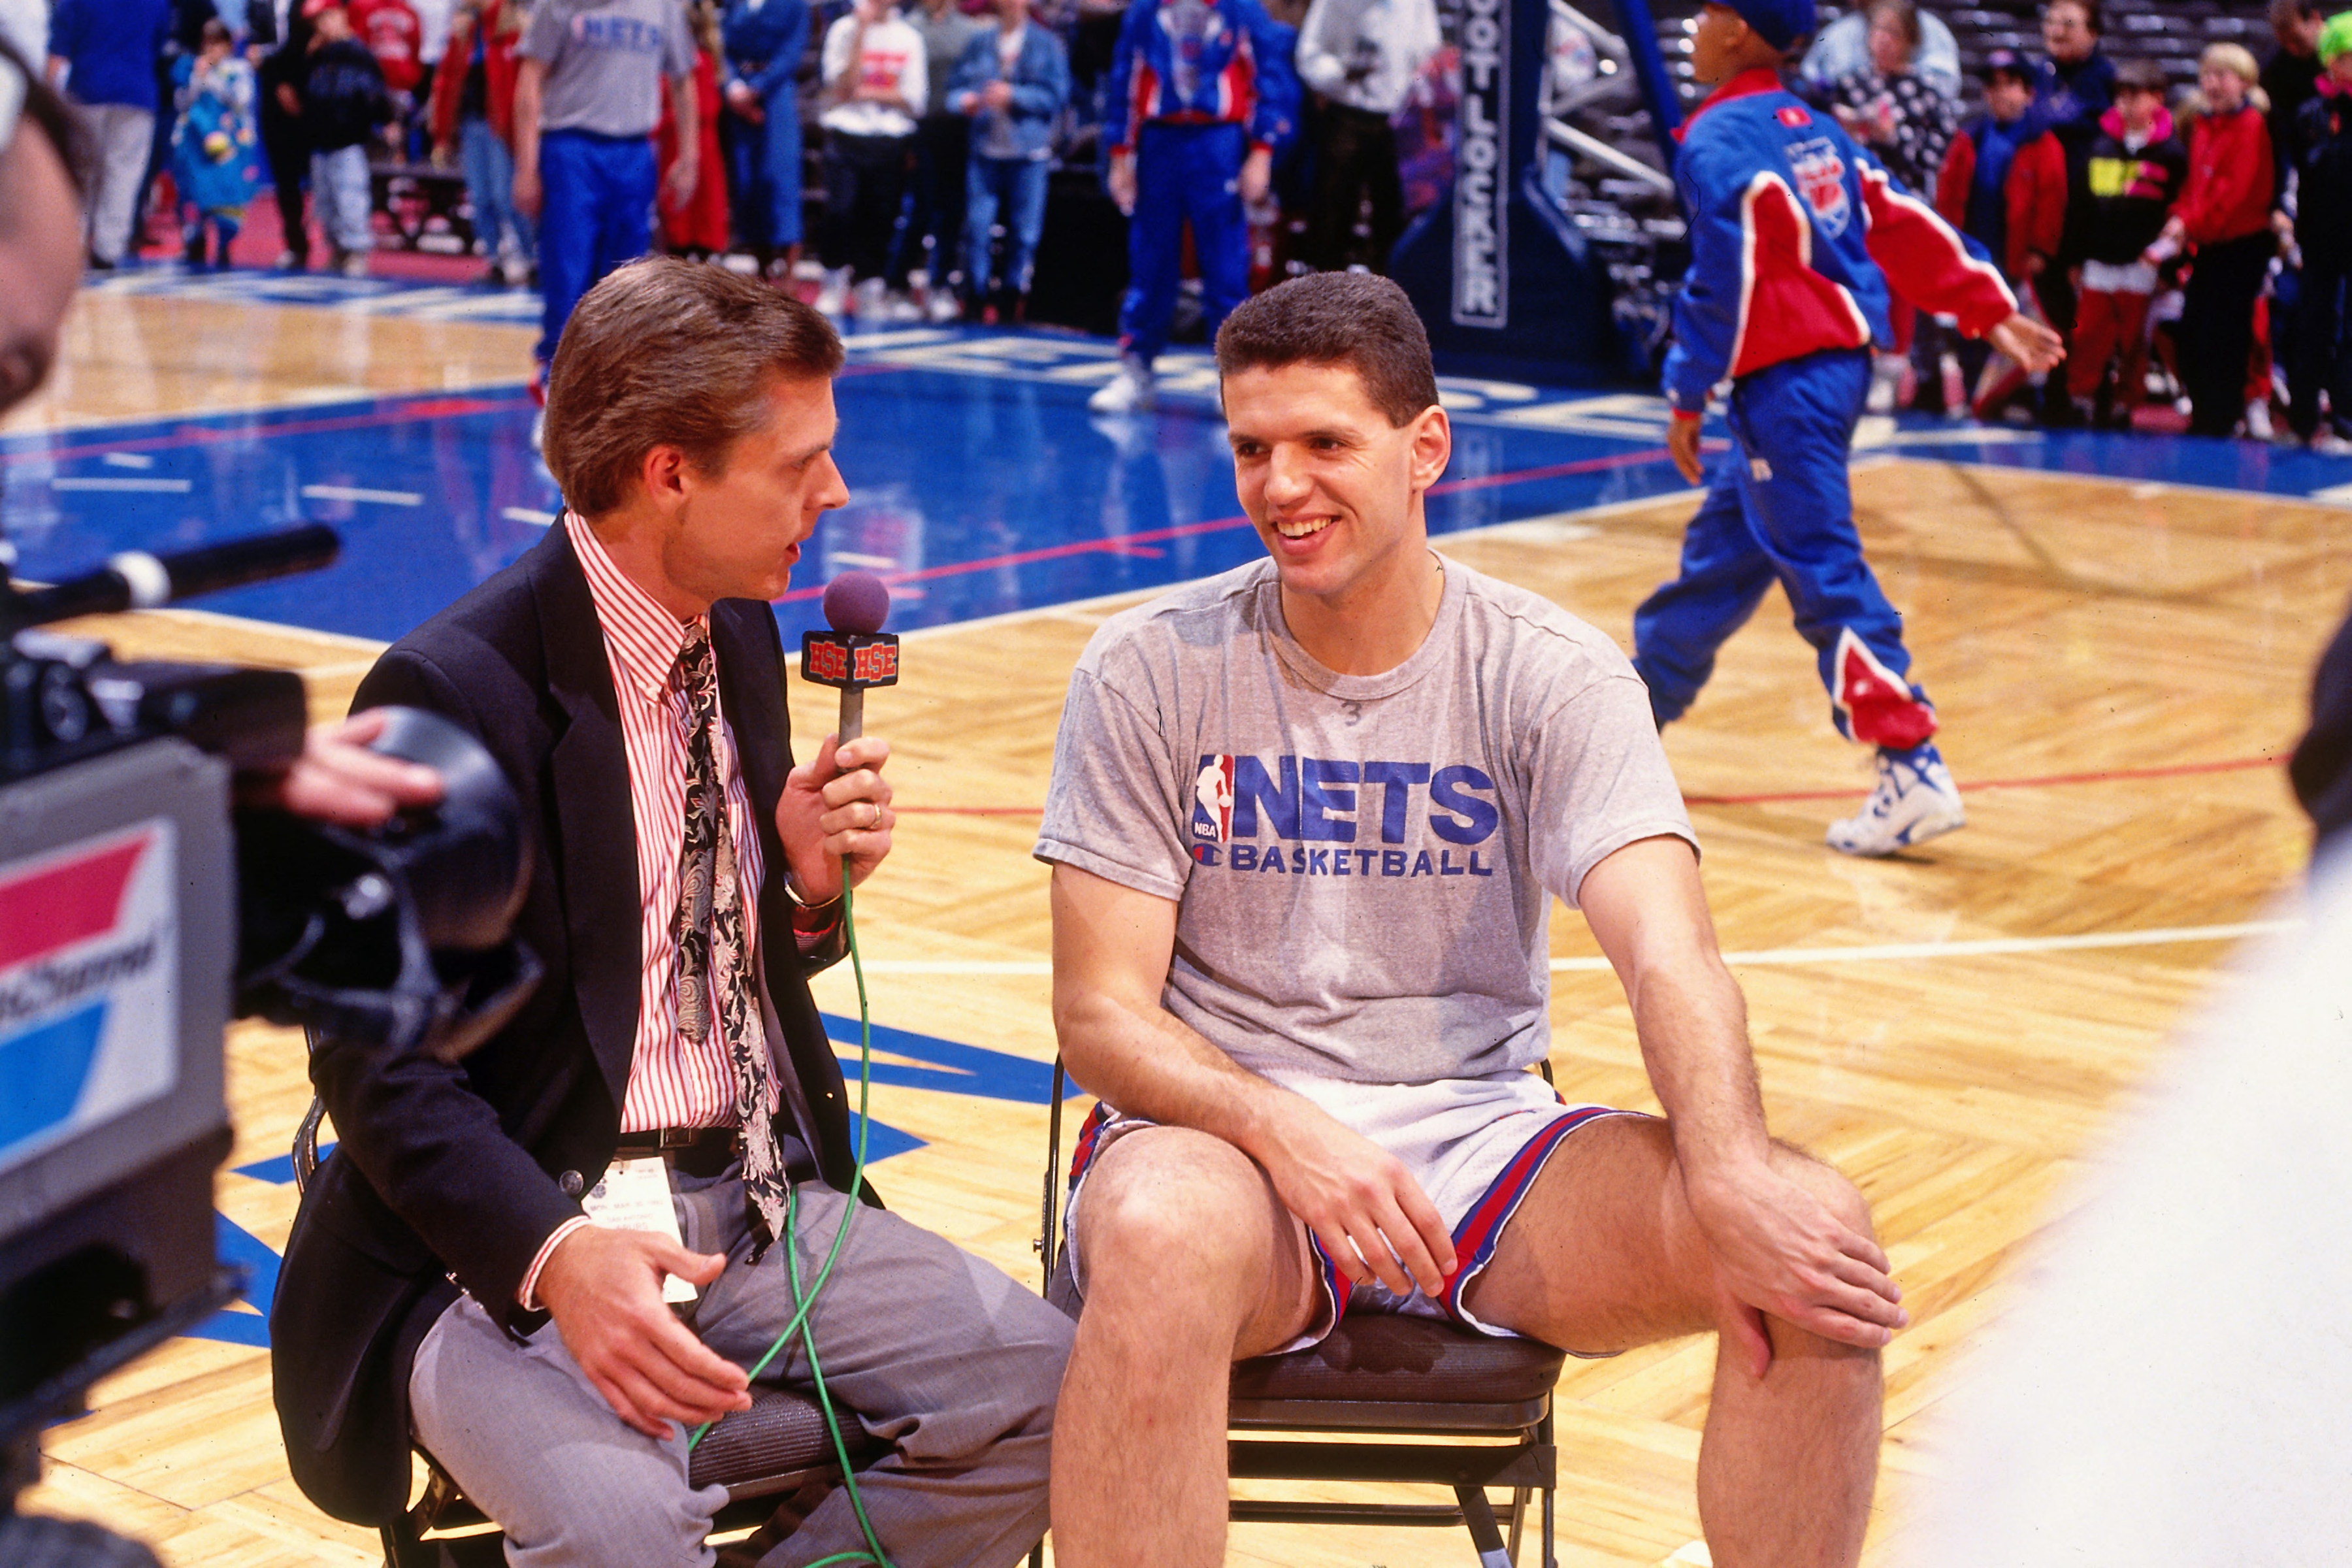 Today in history: Drazen Petrovic's jersey retired by New Jersey Nets 